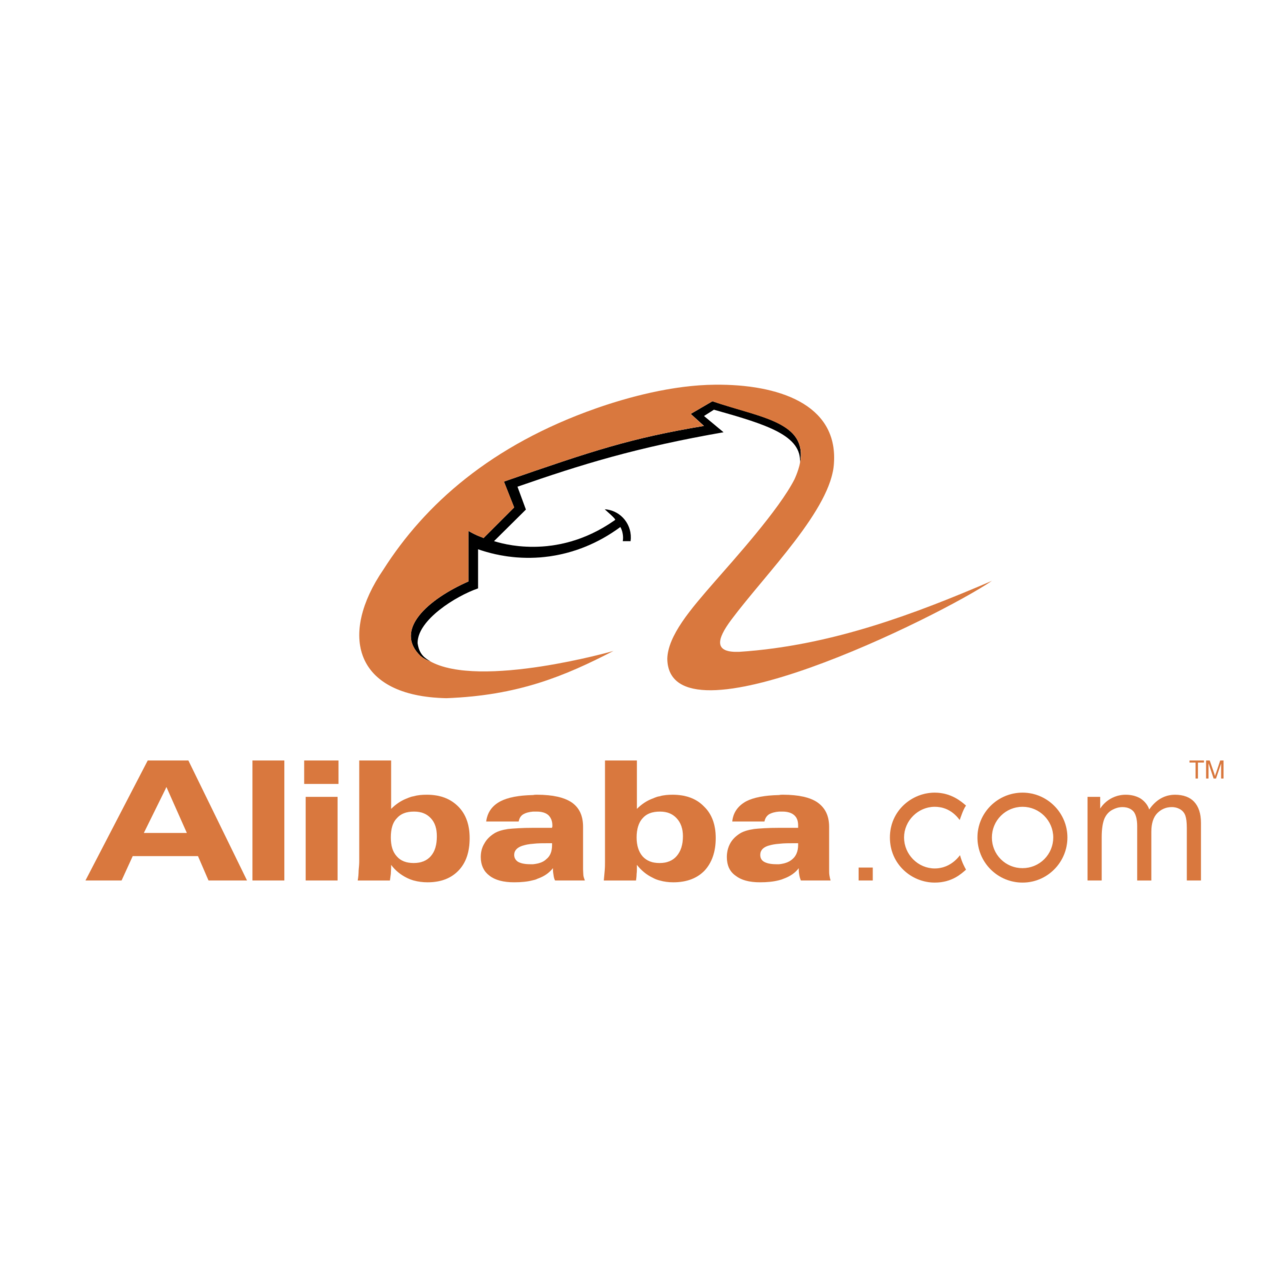     Alibaba Group Holding Limited